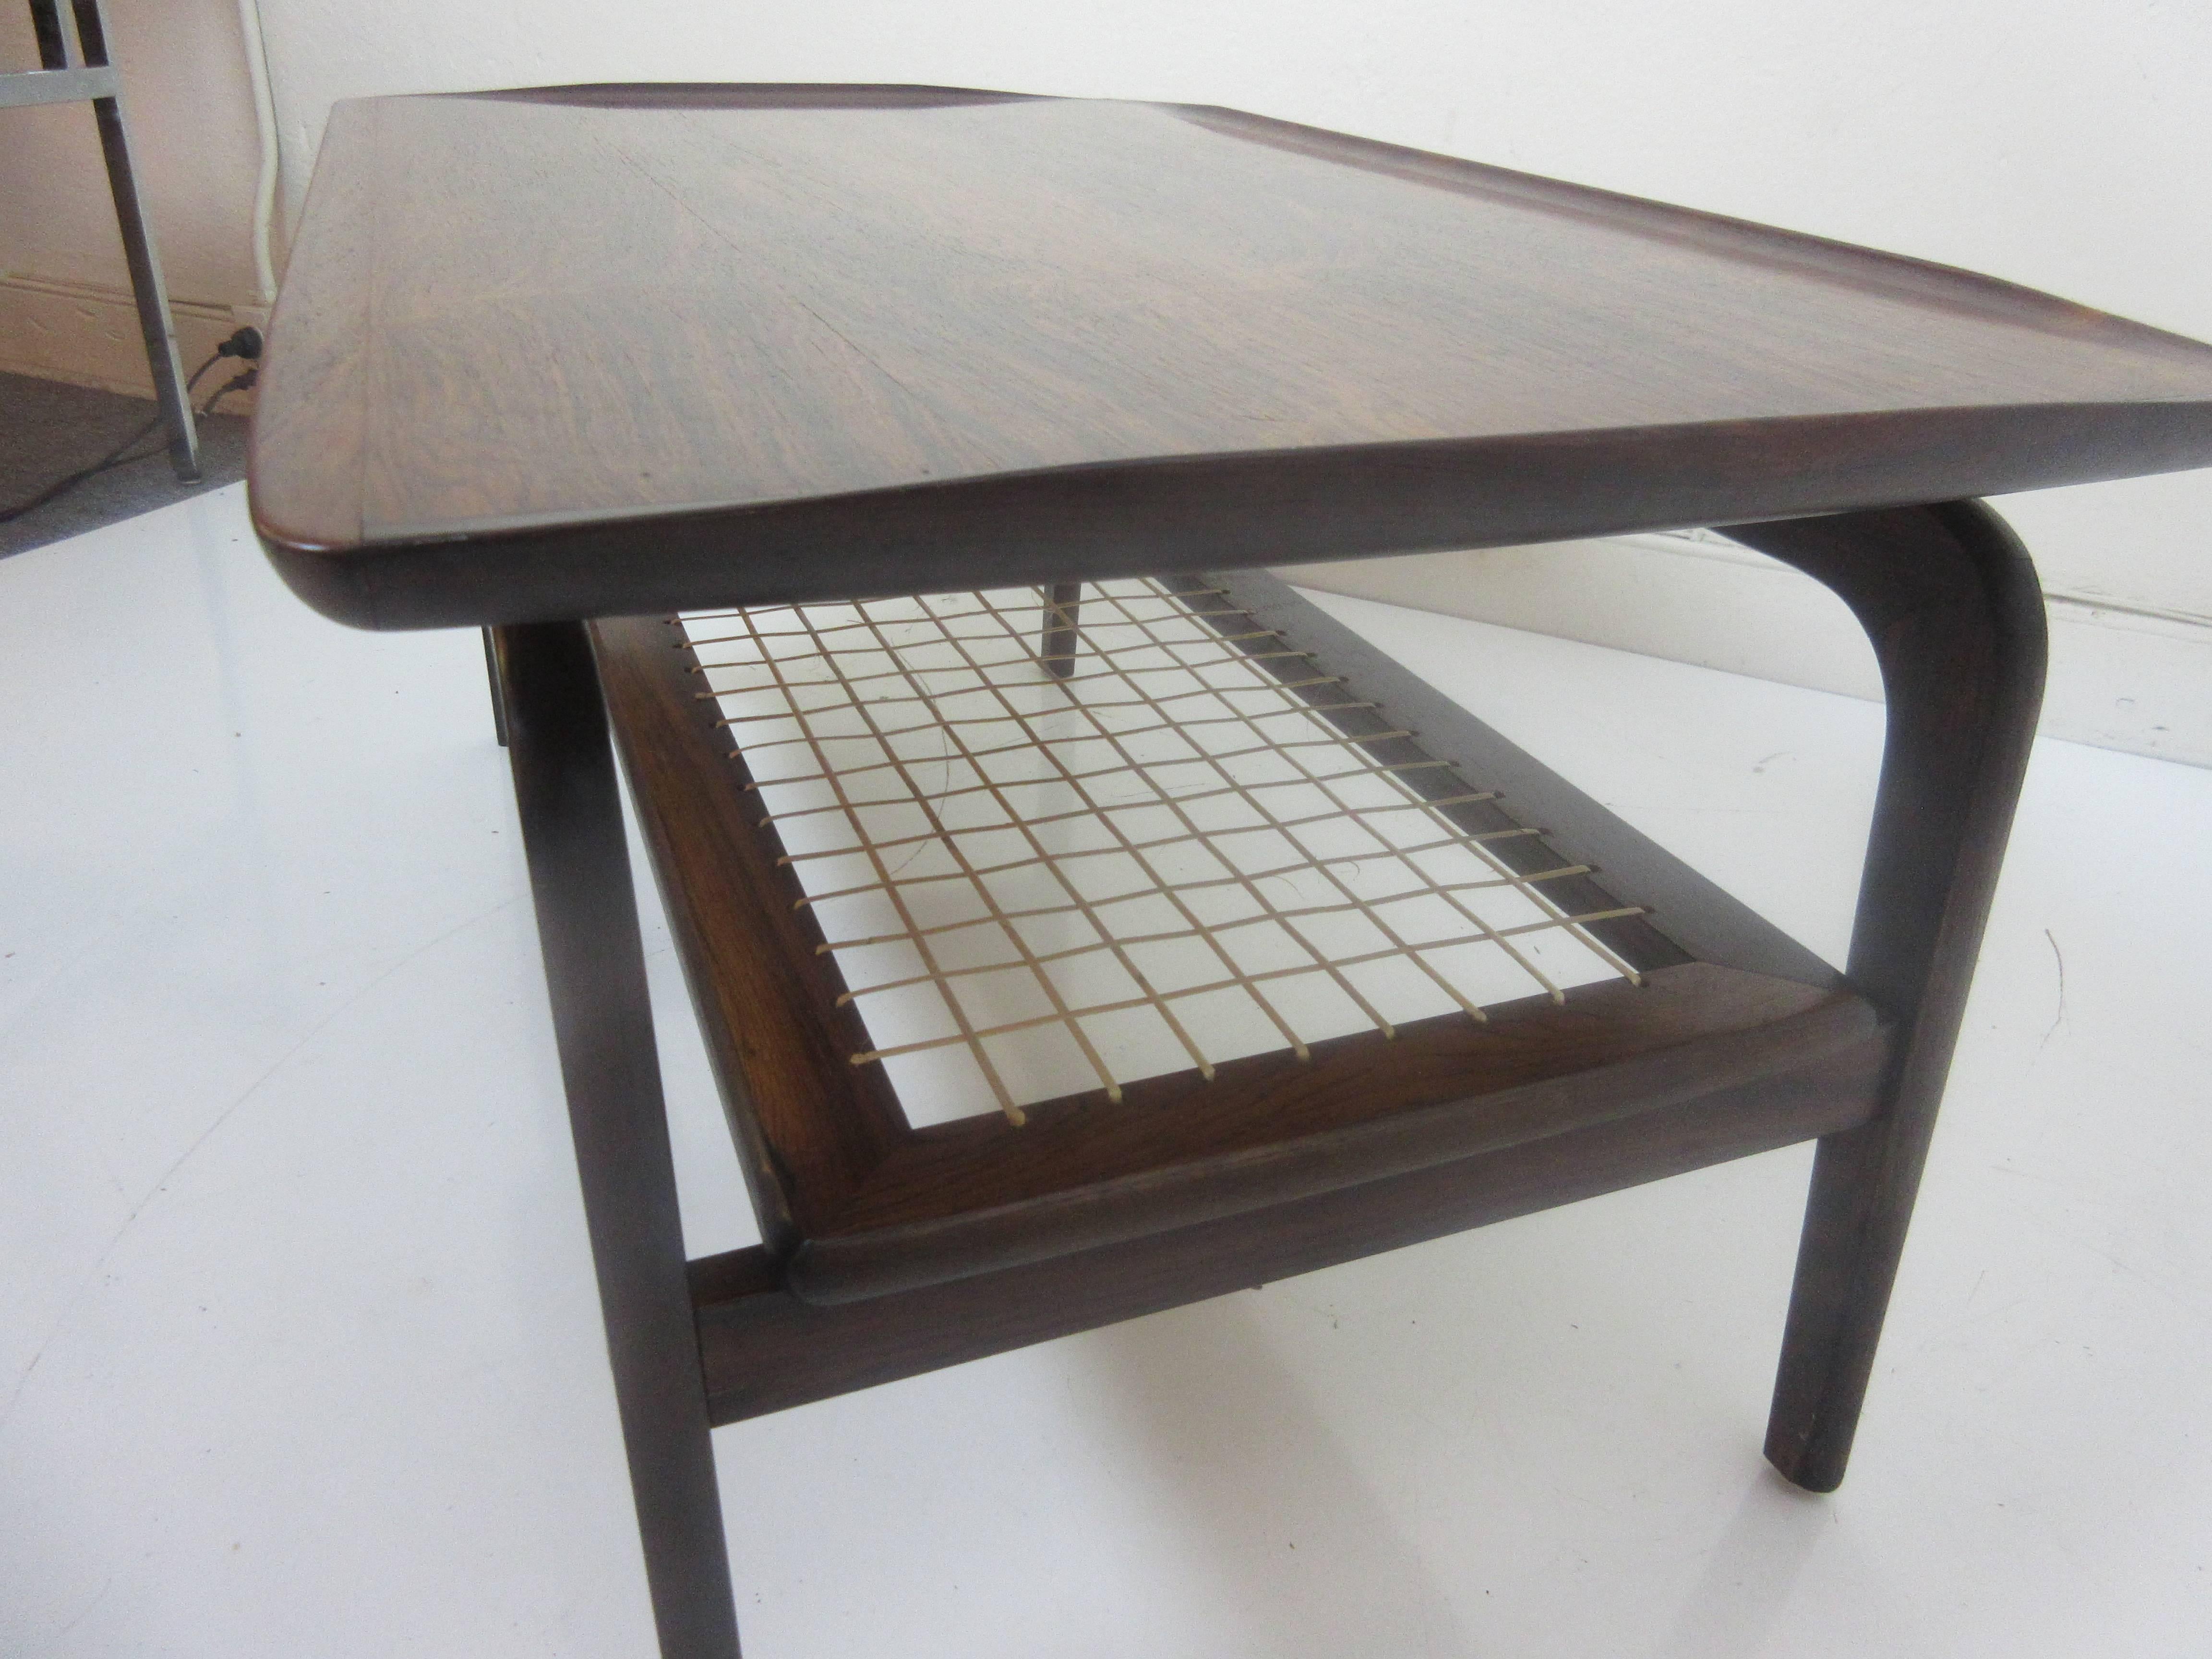 Scandinavian Modern Peter Hvidt for John Stuart Rosewood Coffee Table with Canned Magazine Rack